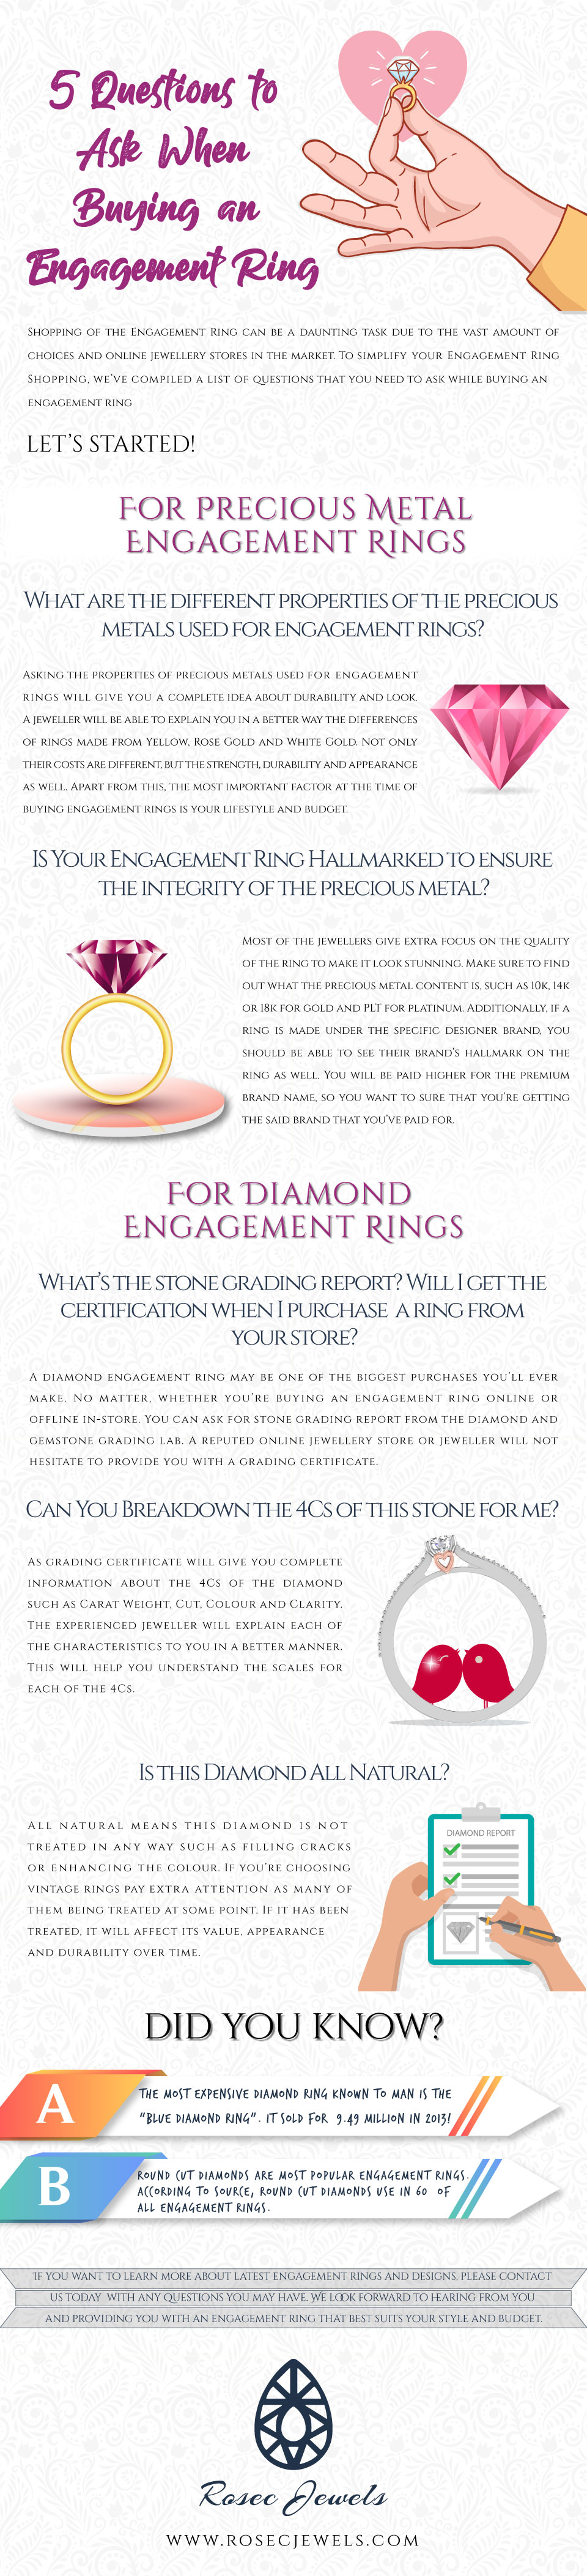 5 Questions to ask when buying engagement Ring